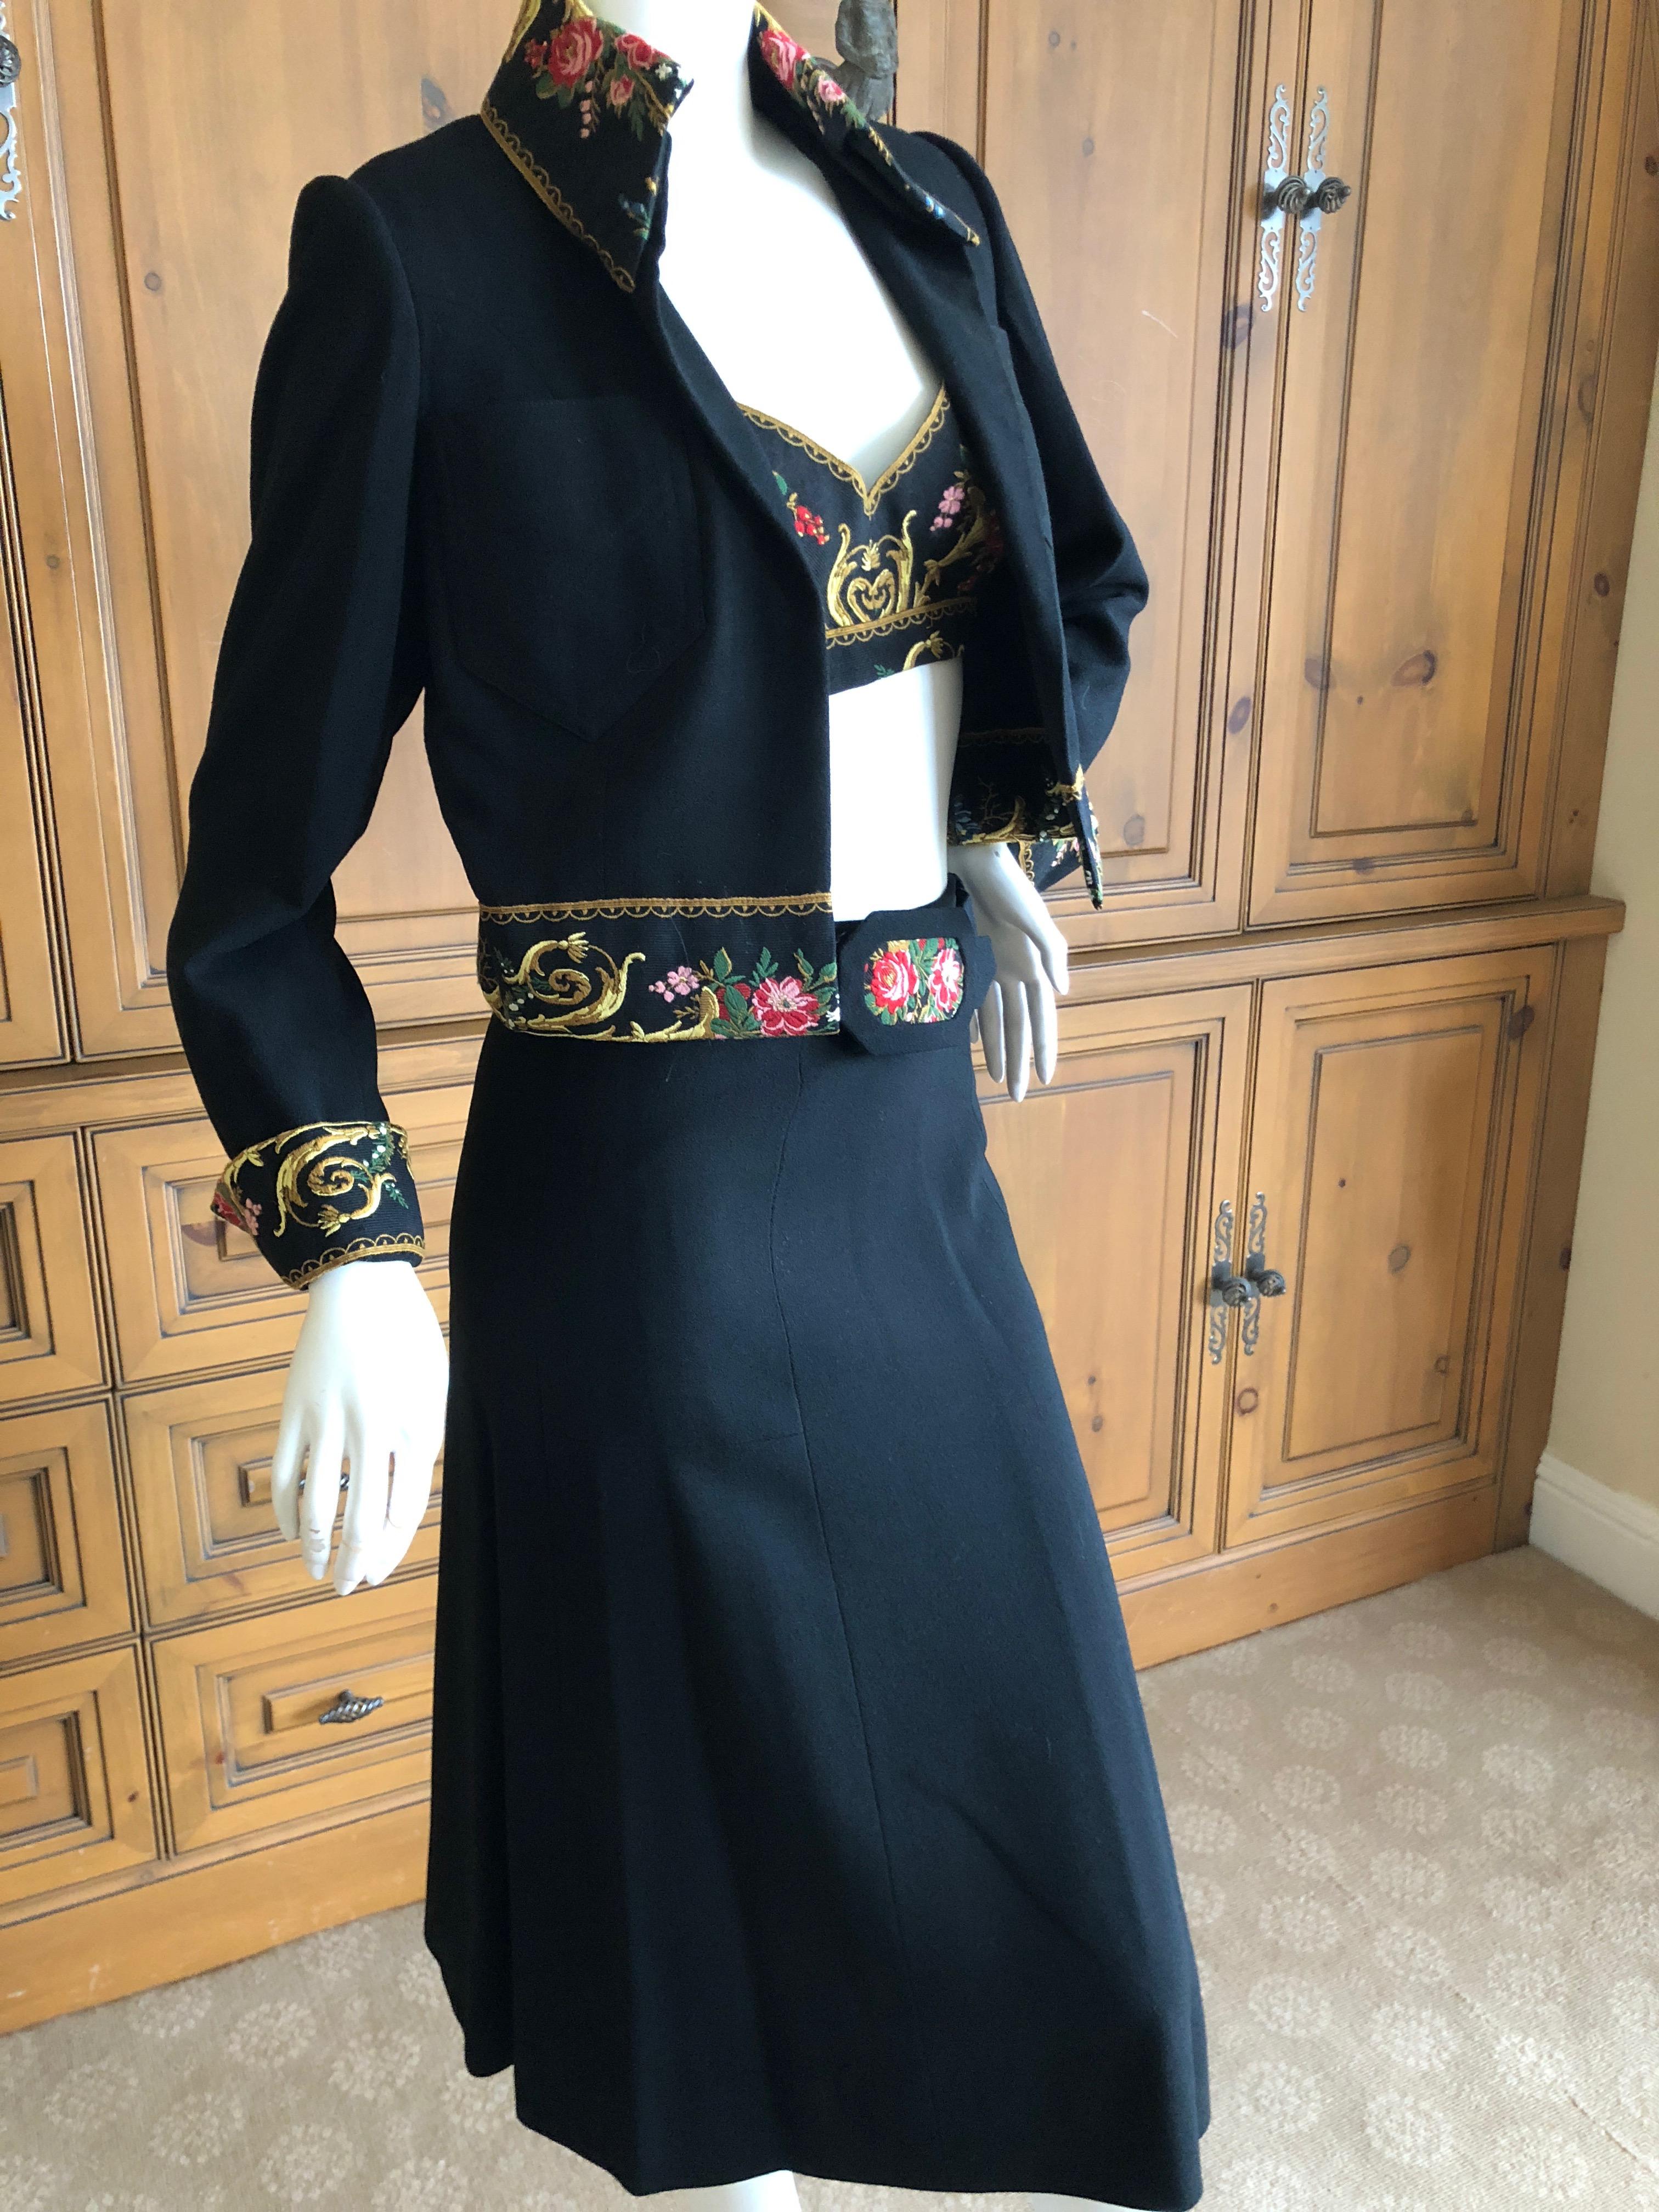 Cardinali Embroidered Black Cotton Skirt Suit with Midriff Baring Bra Fall 1971  For Sale 2